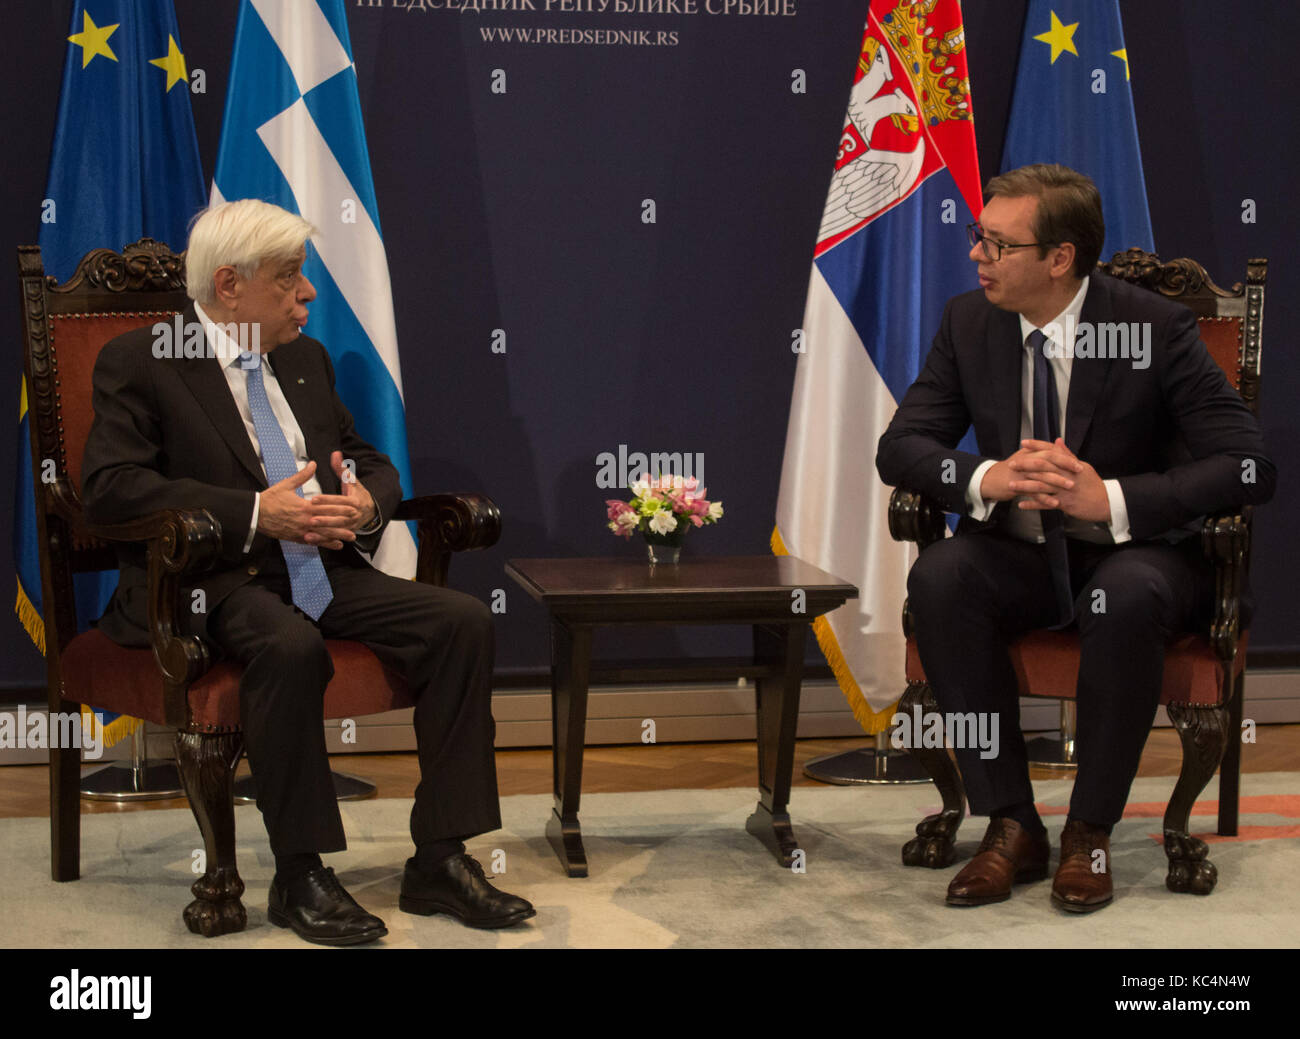 (171002) -- BELGRADE, Oct. 2, 2017 (Xinhua) -- Visiting Greek President Prokopis Pavlopoulos (L) talks to his Serbian counterpart Aleksandar Vucic in Belgrade, Serbia, Oct. 2, 2017. Greece will support Serbia as well as all other Balkan countries who wish to become part of the European Union (EU), but these countries must respect international right, as well as European principles and heritage, said Greek President Prokopis Pavlopoulos during his visit to Serbia on Monday. (Xinhua/Nemanja Cabric) Stock Photo